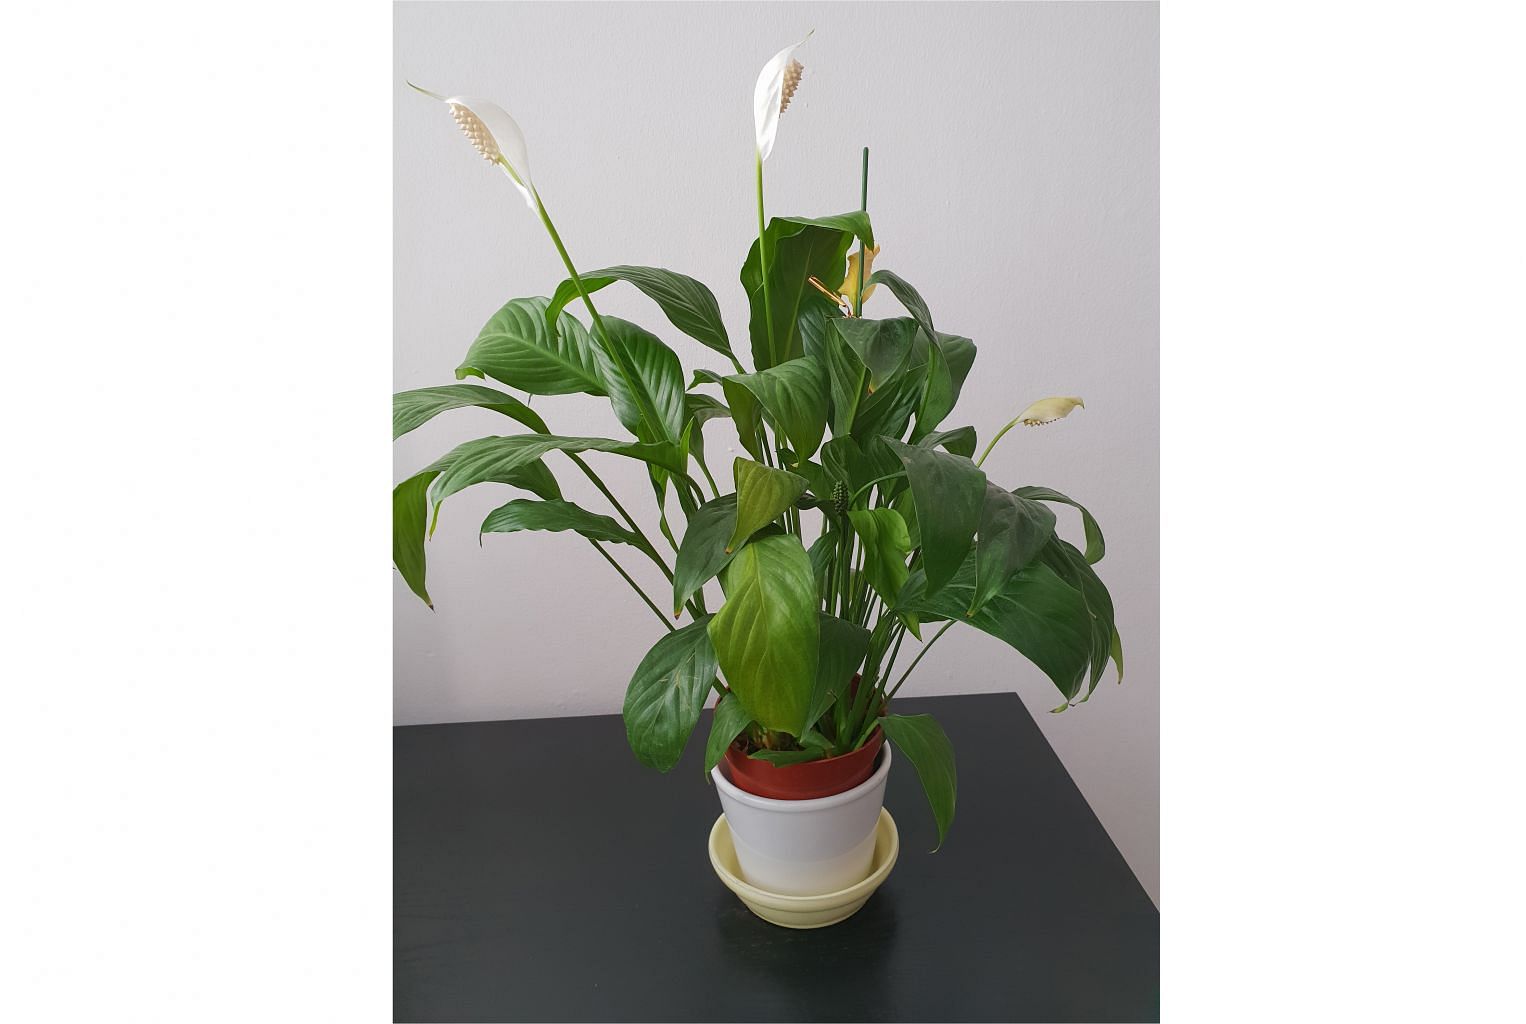 Root Awakening Peace Lily Needs More Water Bigger Pot Home Design News Top Stories The Straits Times